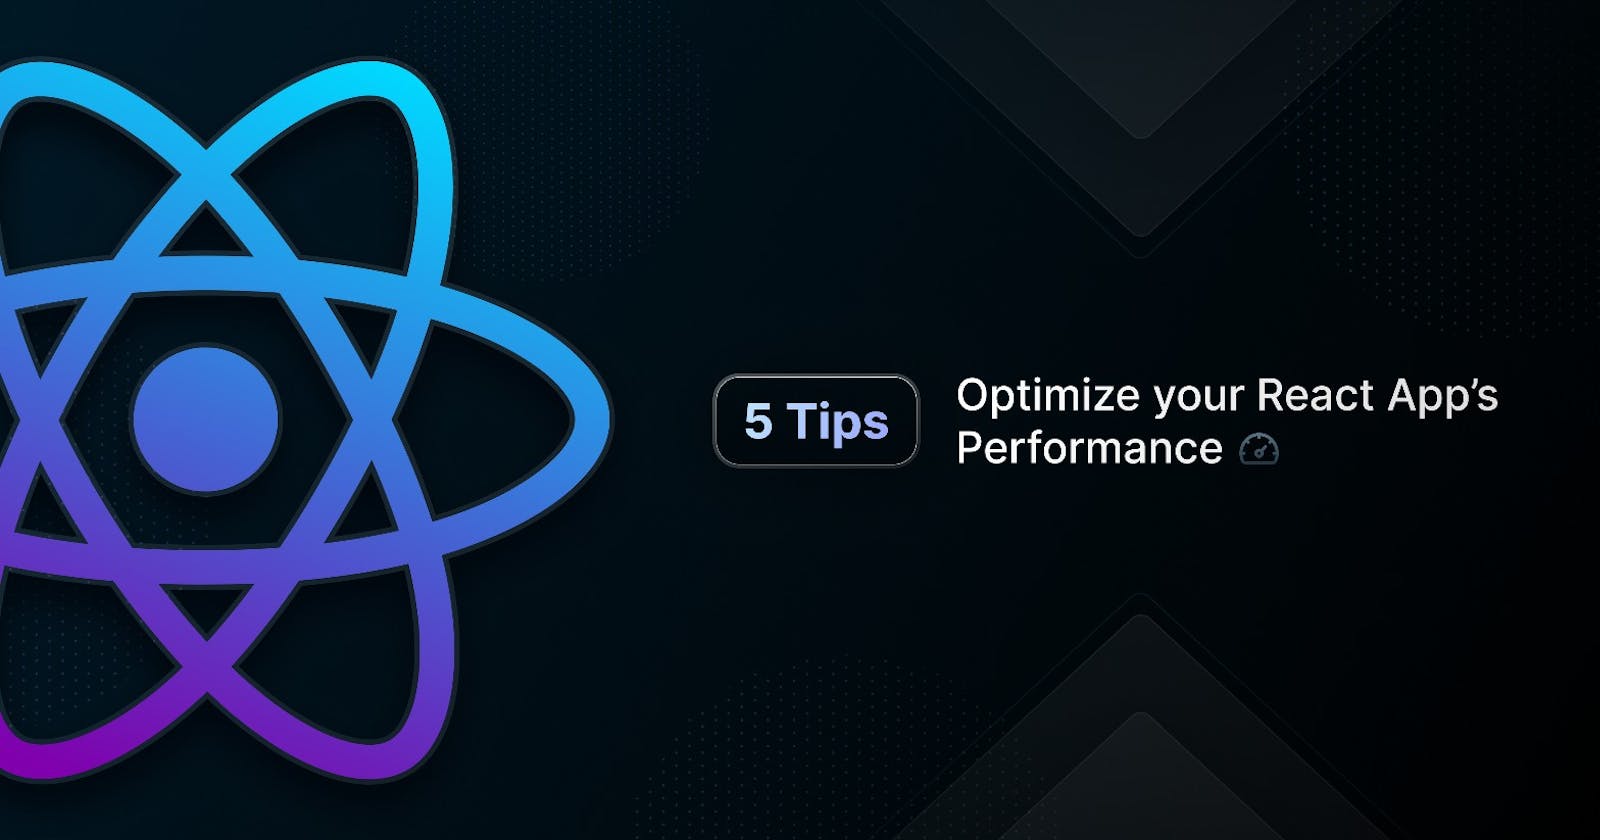 5 Tips for Optimizing Your React App’s Performance